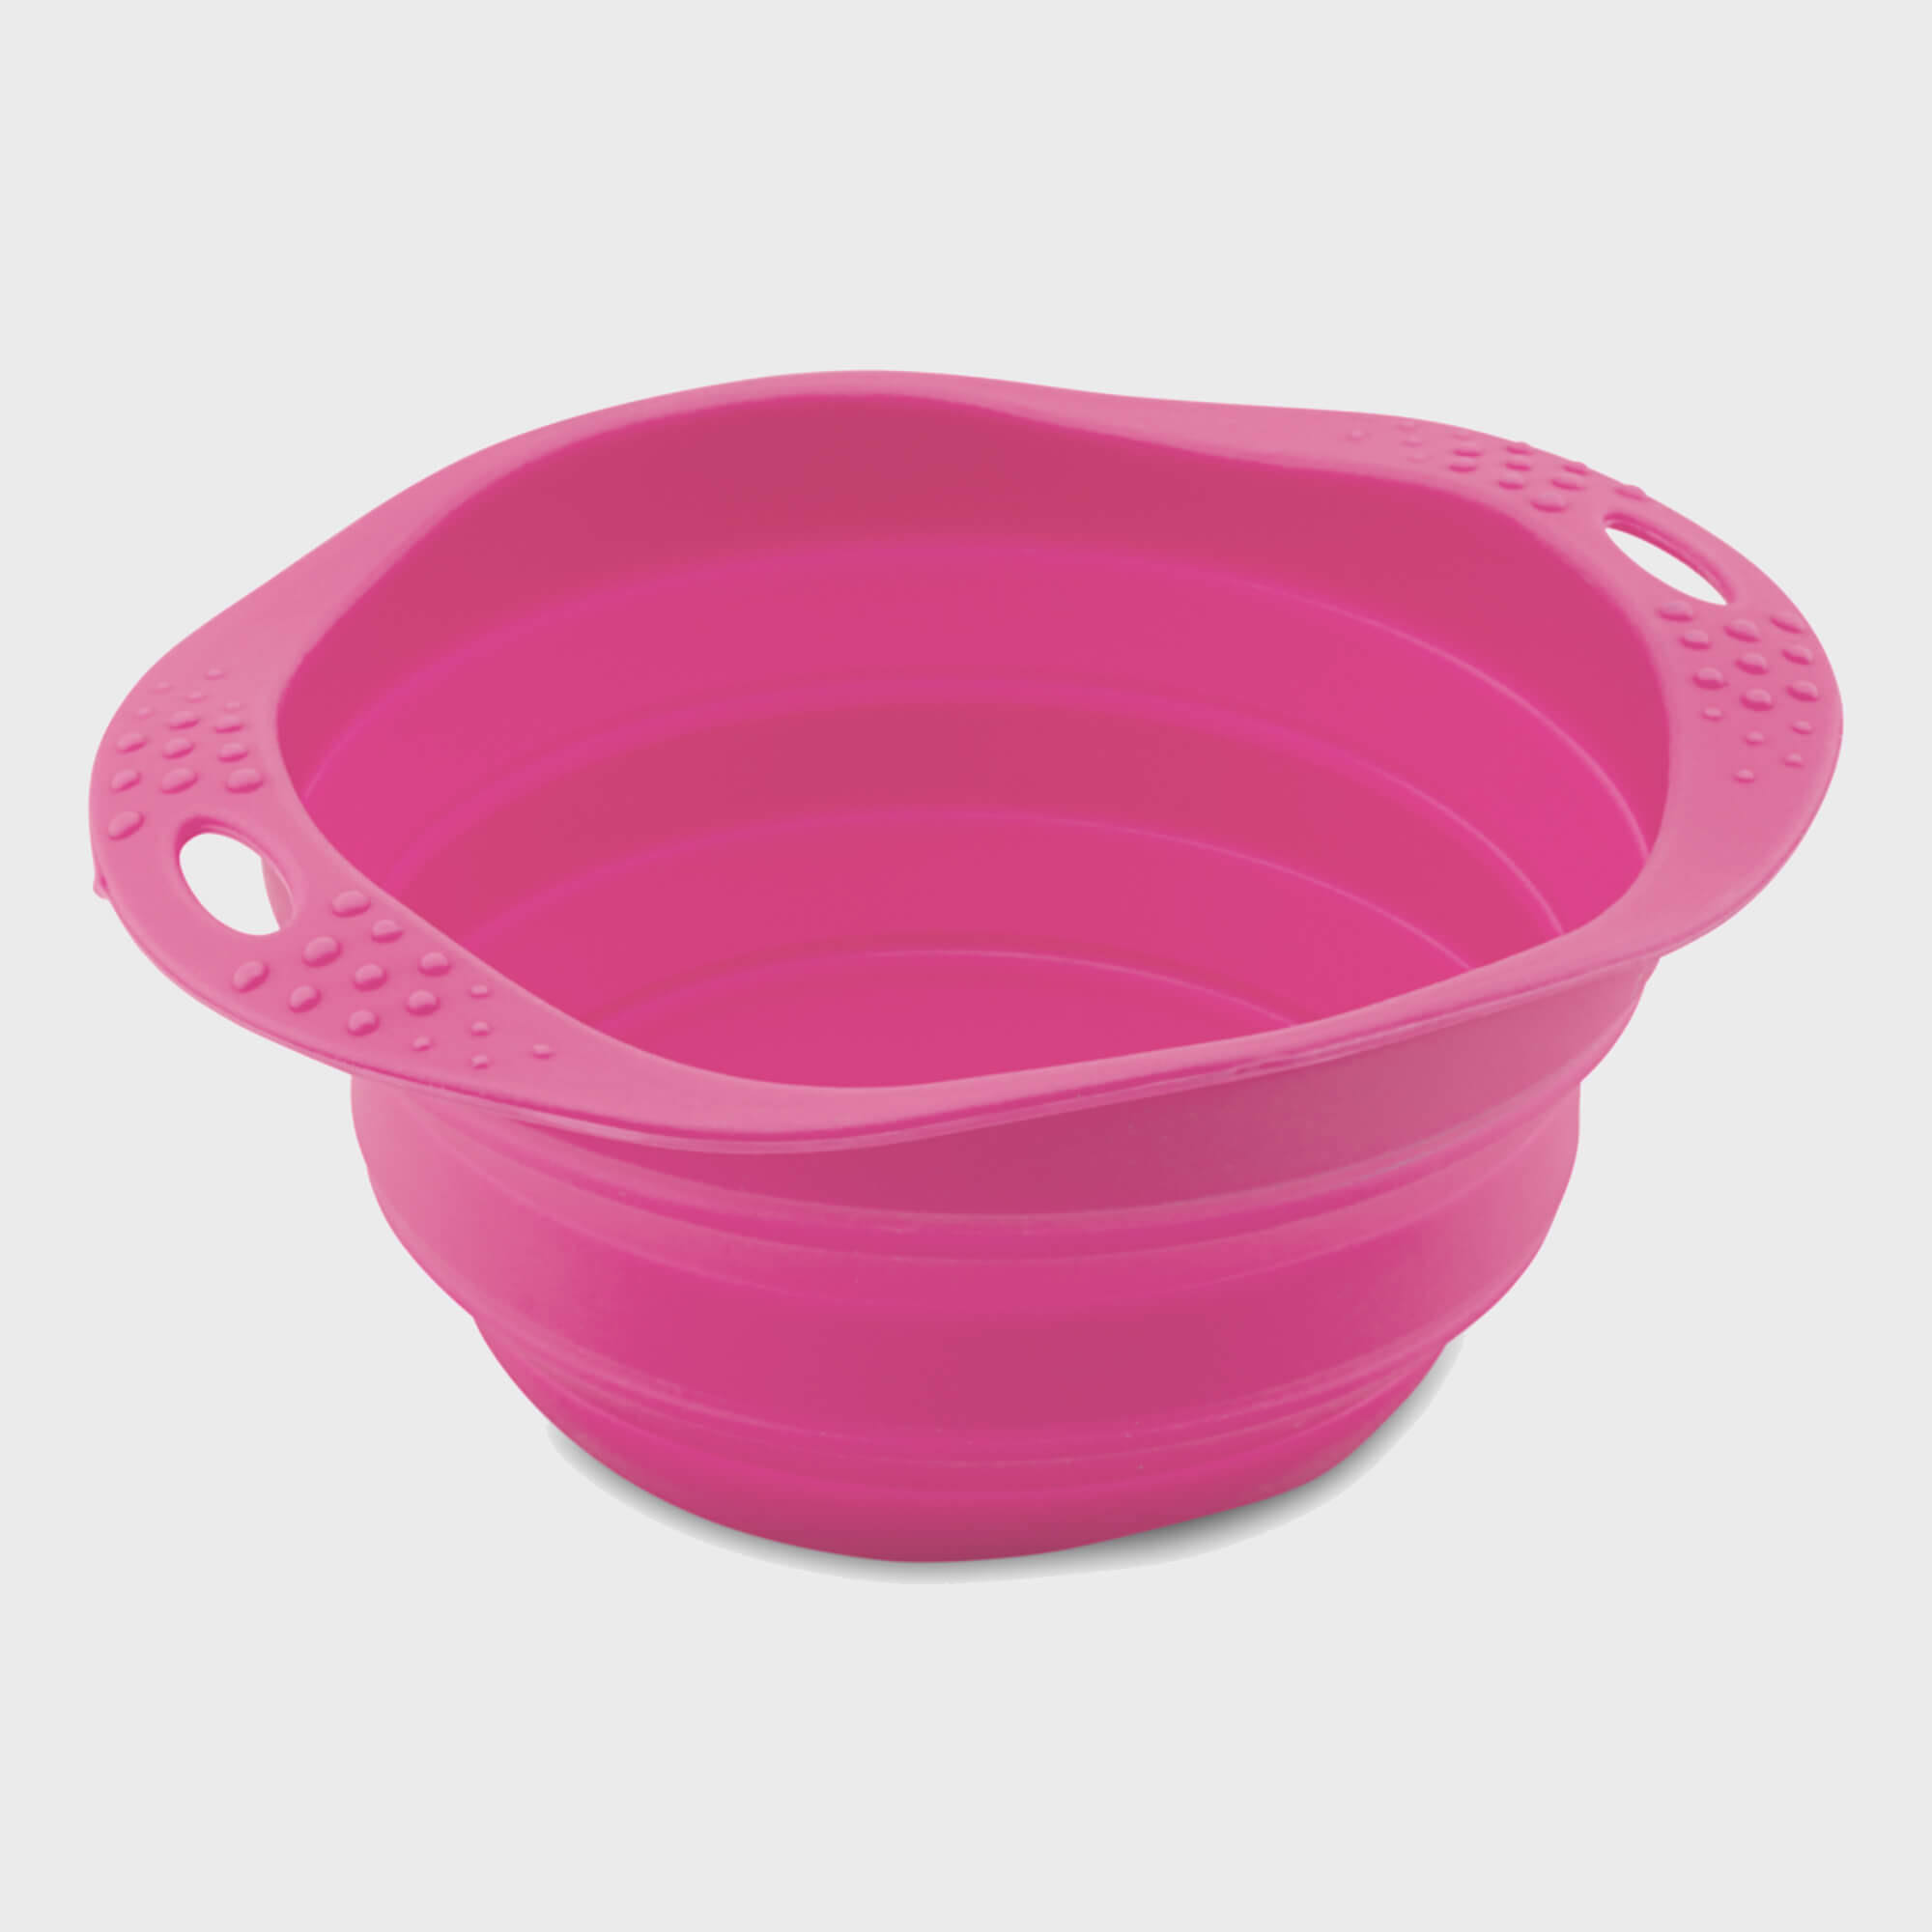 Beco Pets Travel Bowl - Pink